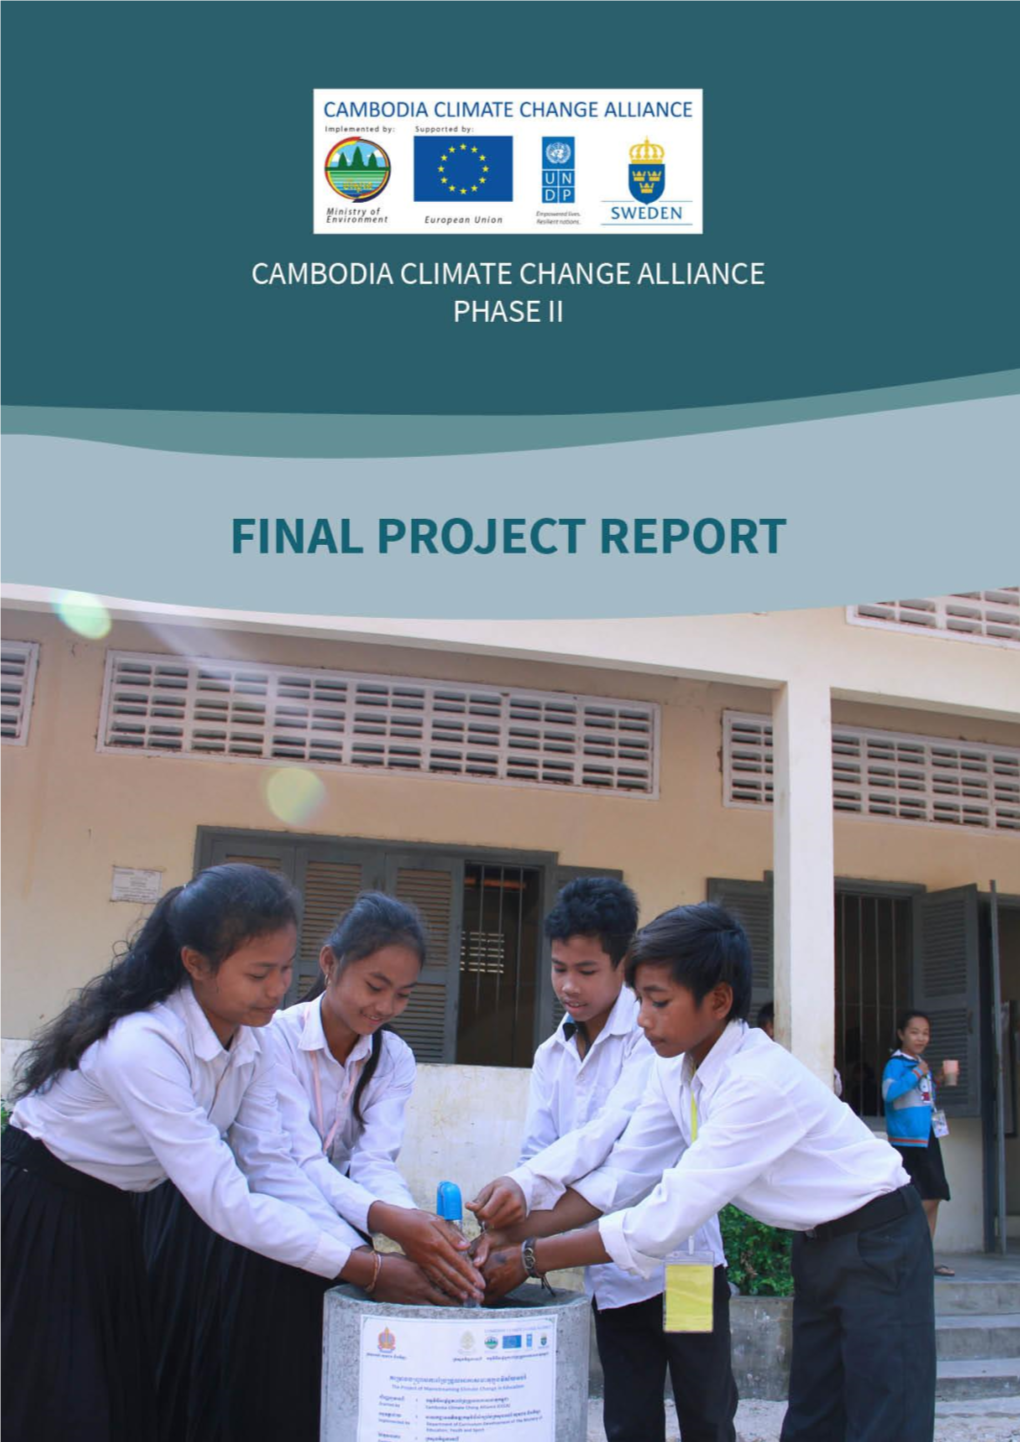 Annual Project Report Guidellines